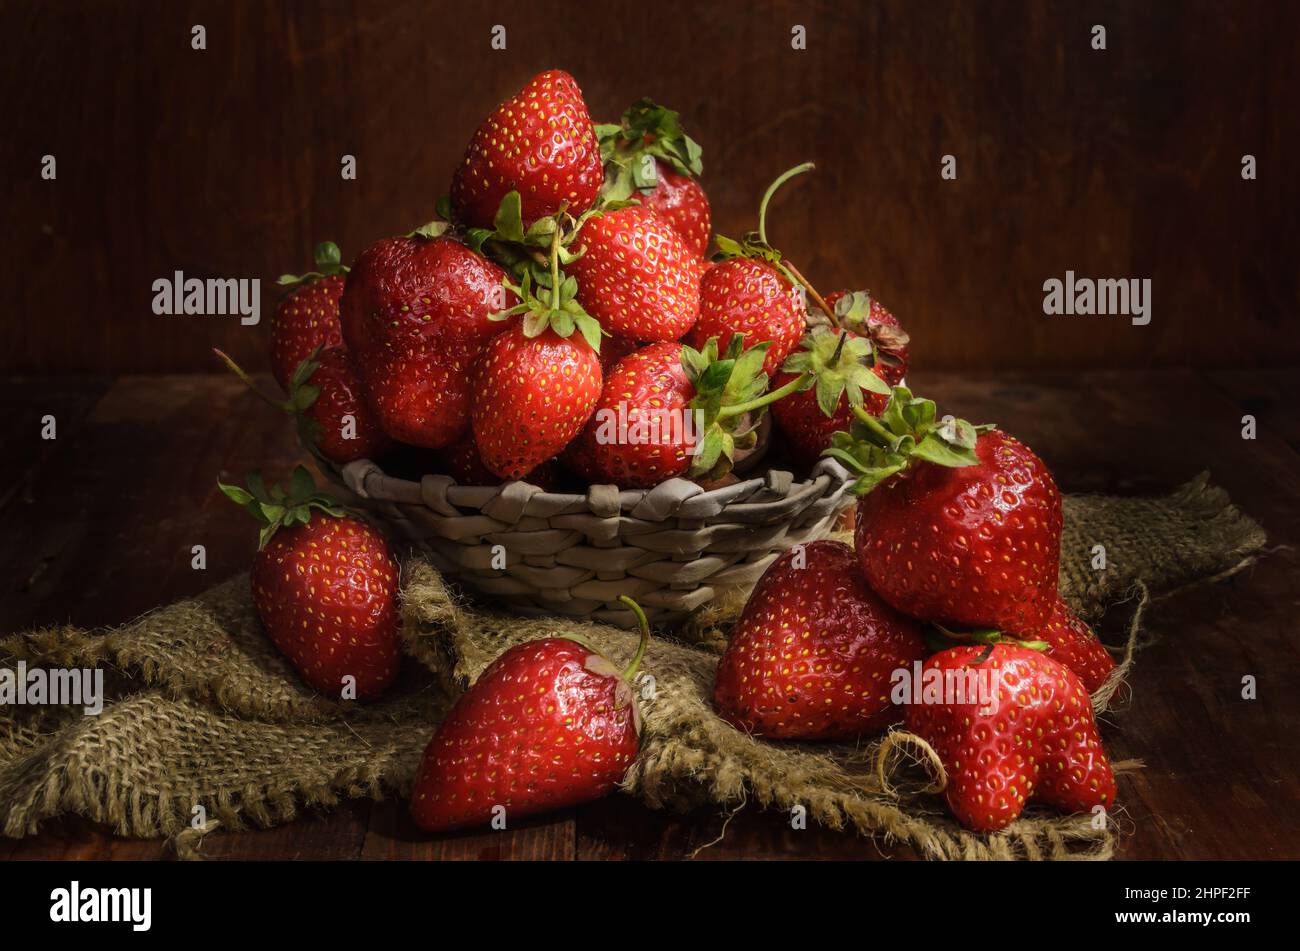 ripe berry on a dark wooden background in a rustic style Stock Photo